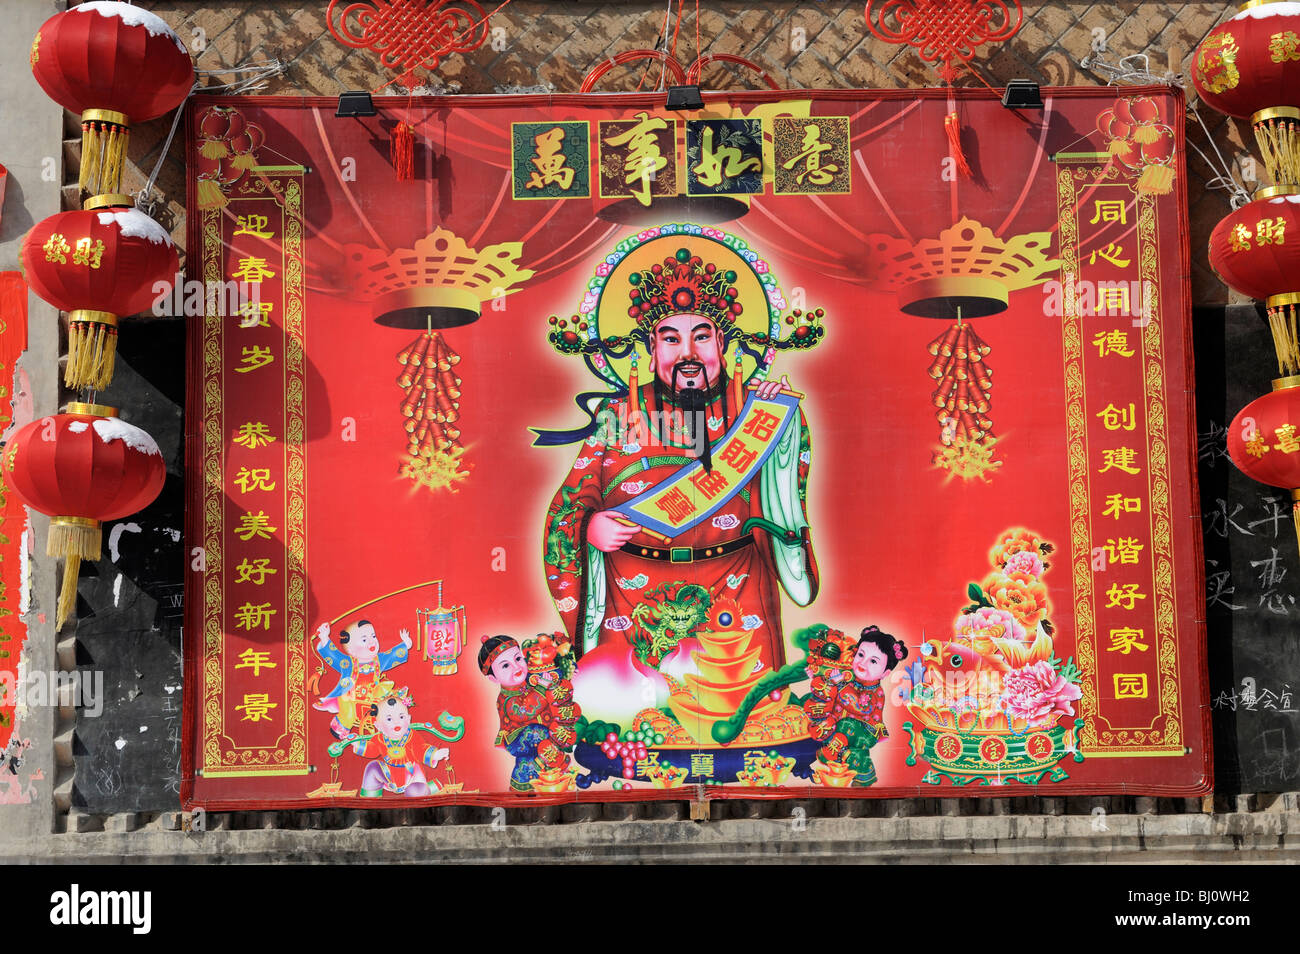 A painting of the God of wealth in Hebei province, China. 01-Mar-2010 Stock Photo